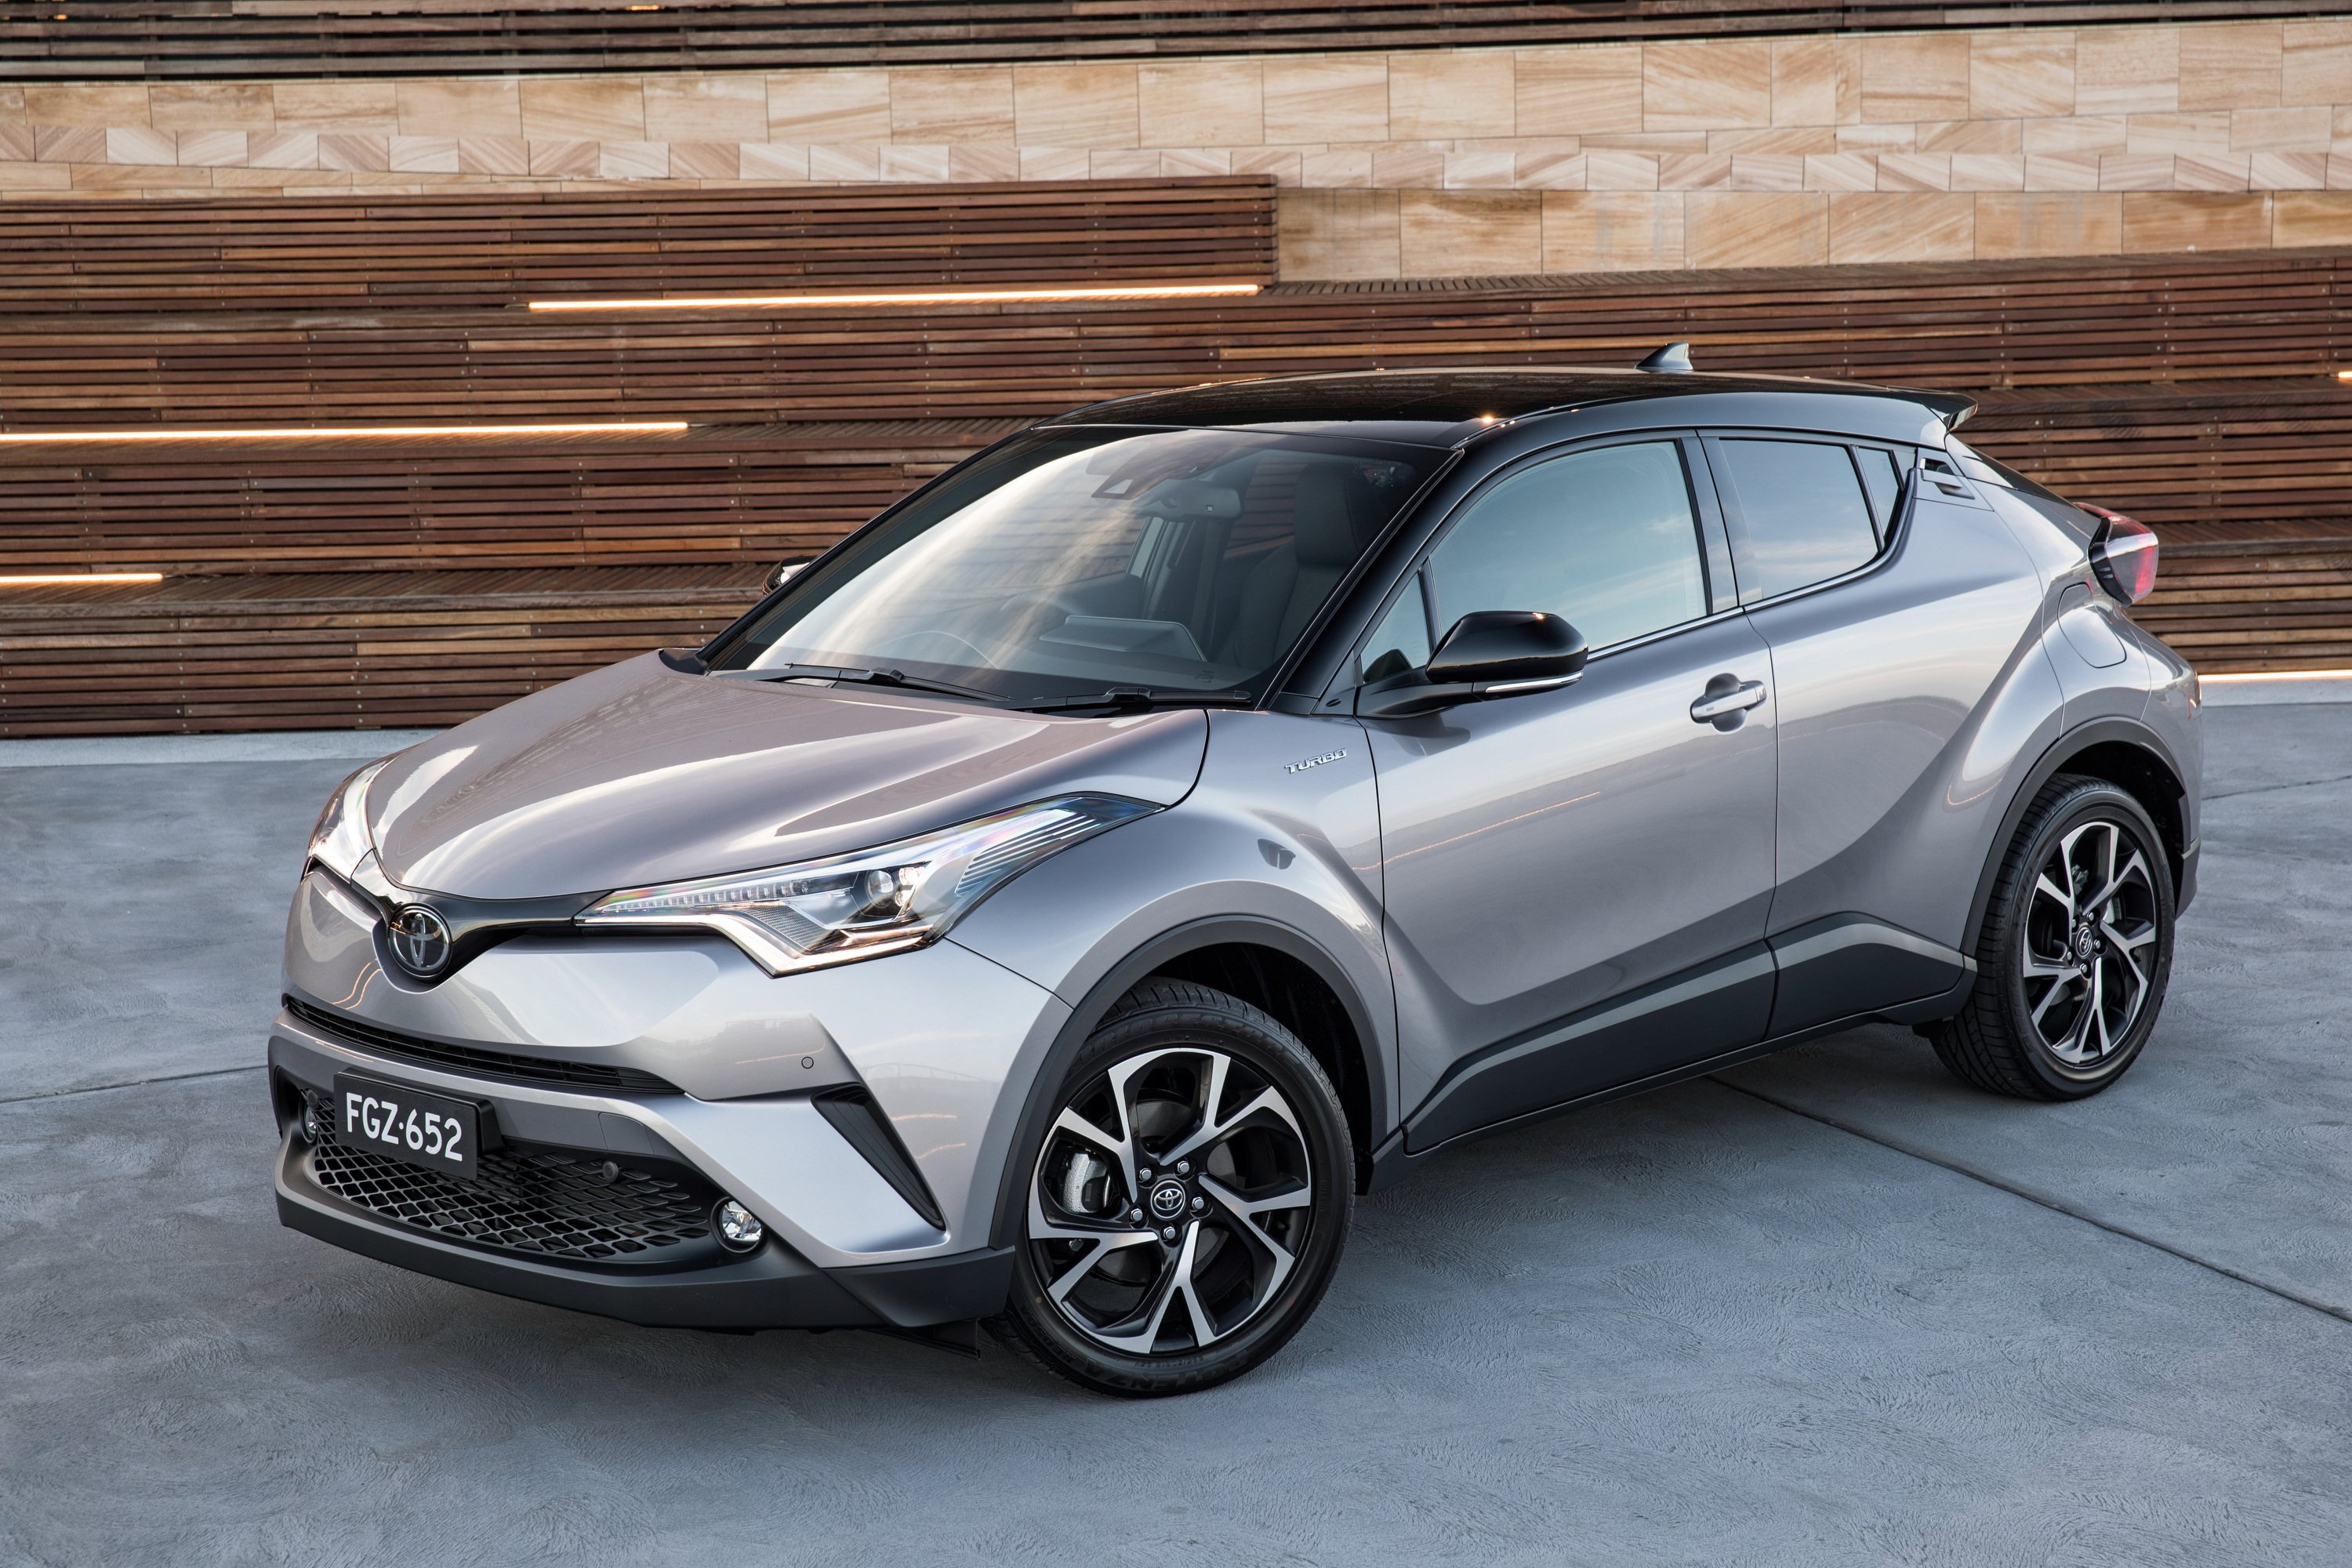 2017 Toyota C-HR pricing and specs - Photos (1 of 14)